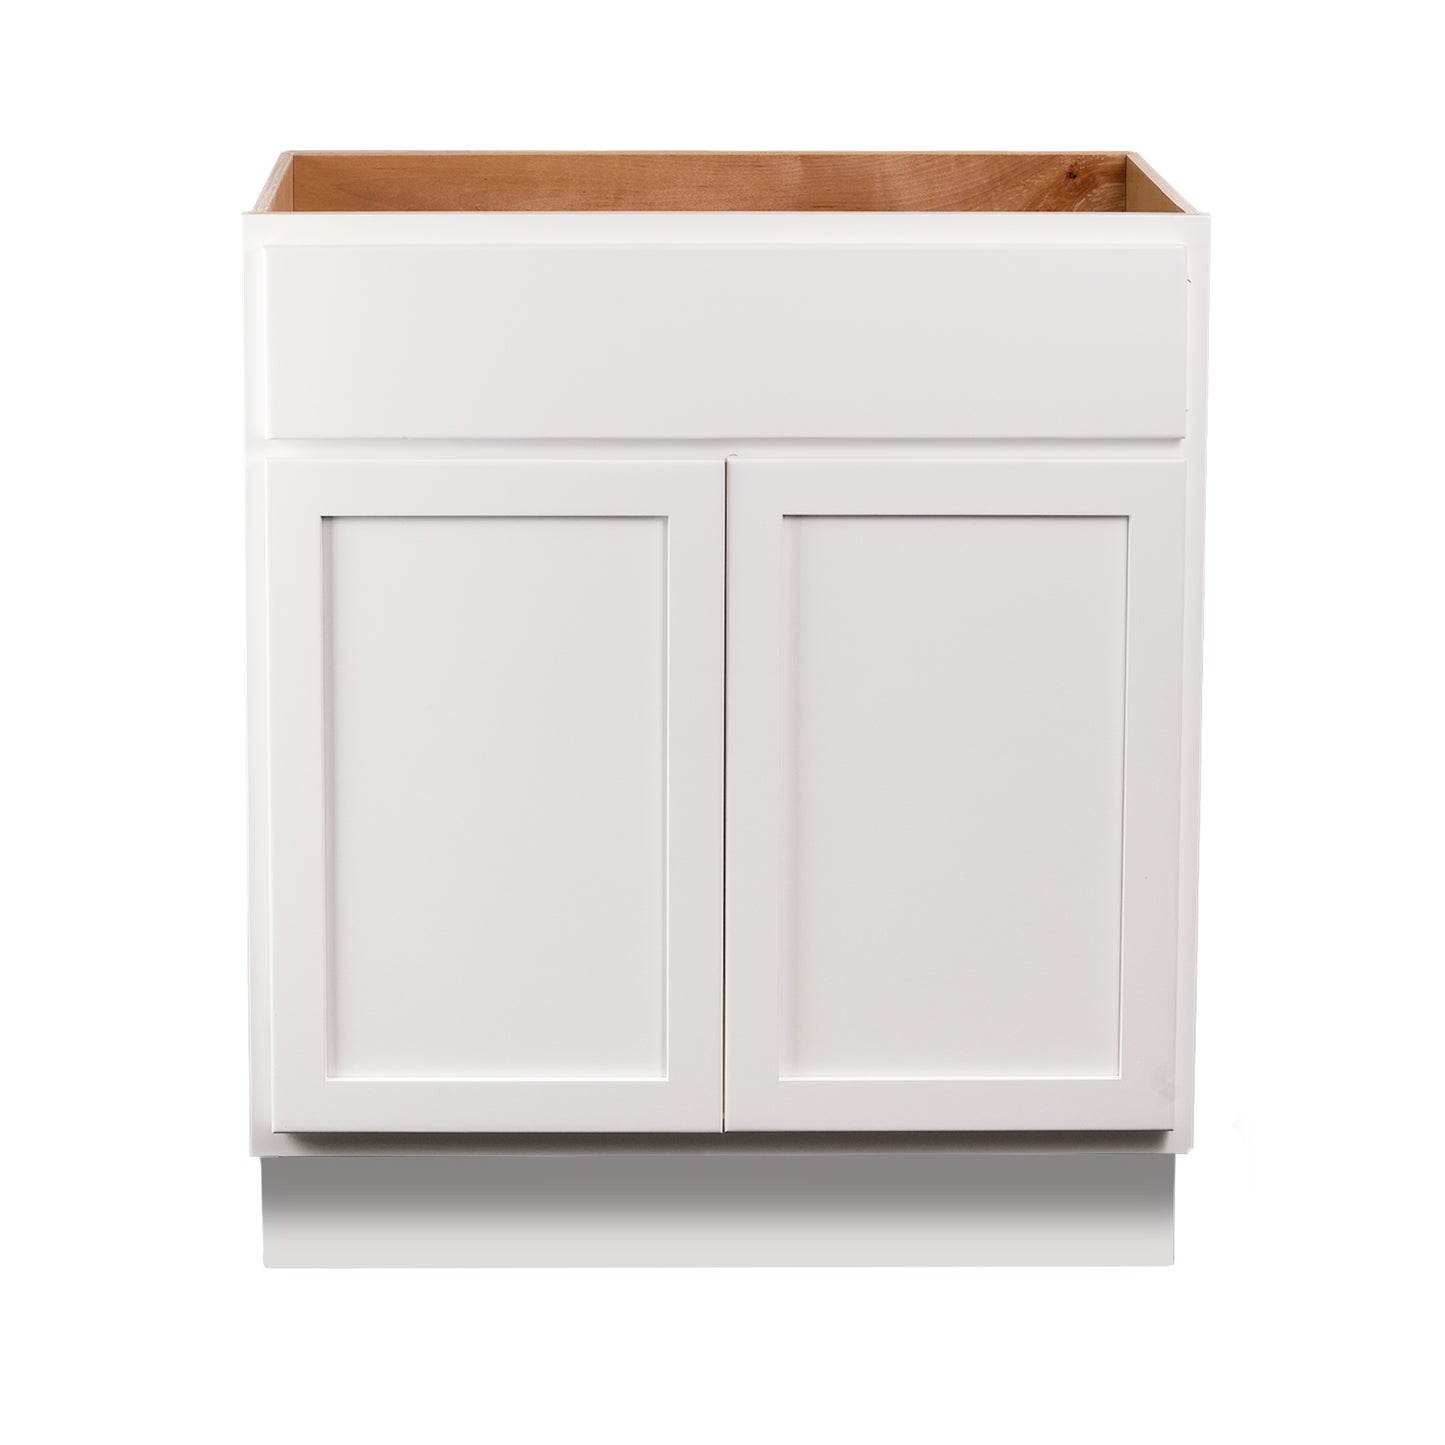 Quicklock RTA (Ready-to-Assemble) Pure White Vanity Base Cabinet | 36"Wx34.5"Hx18"D